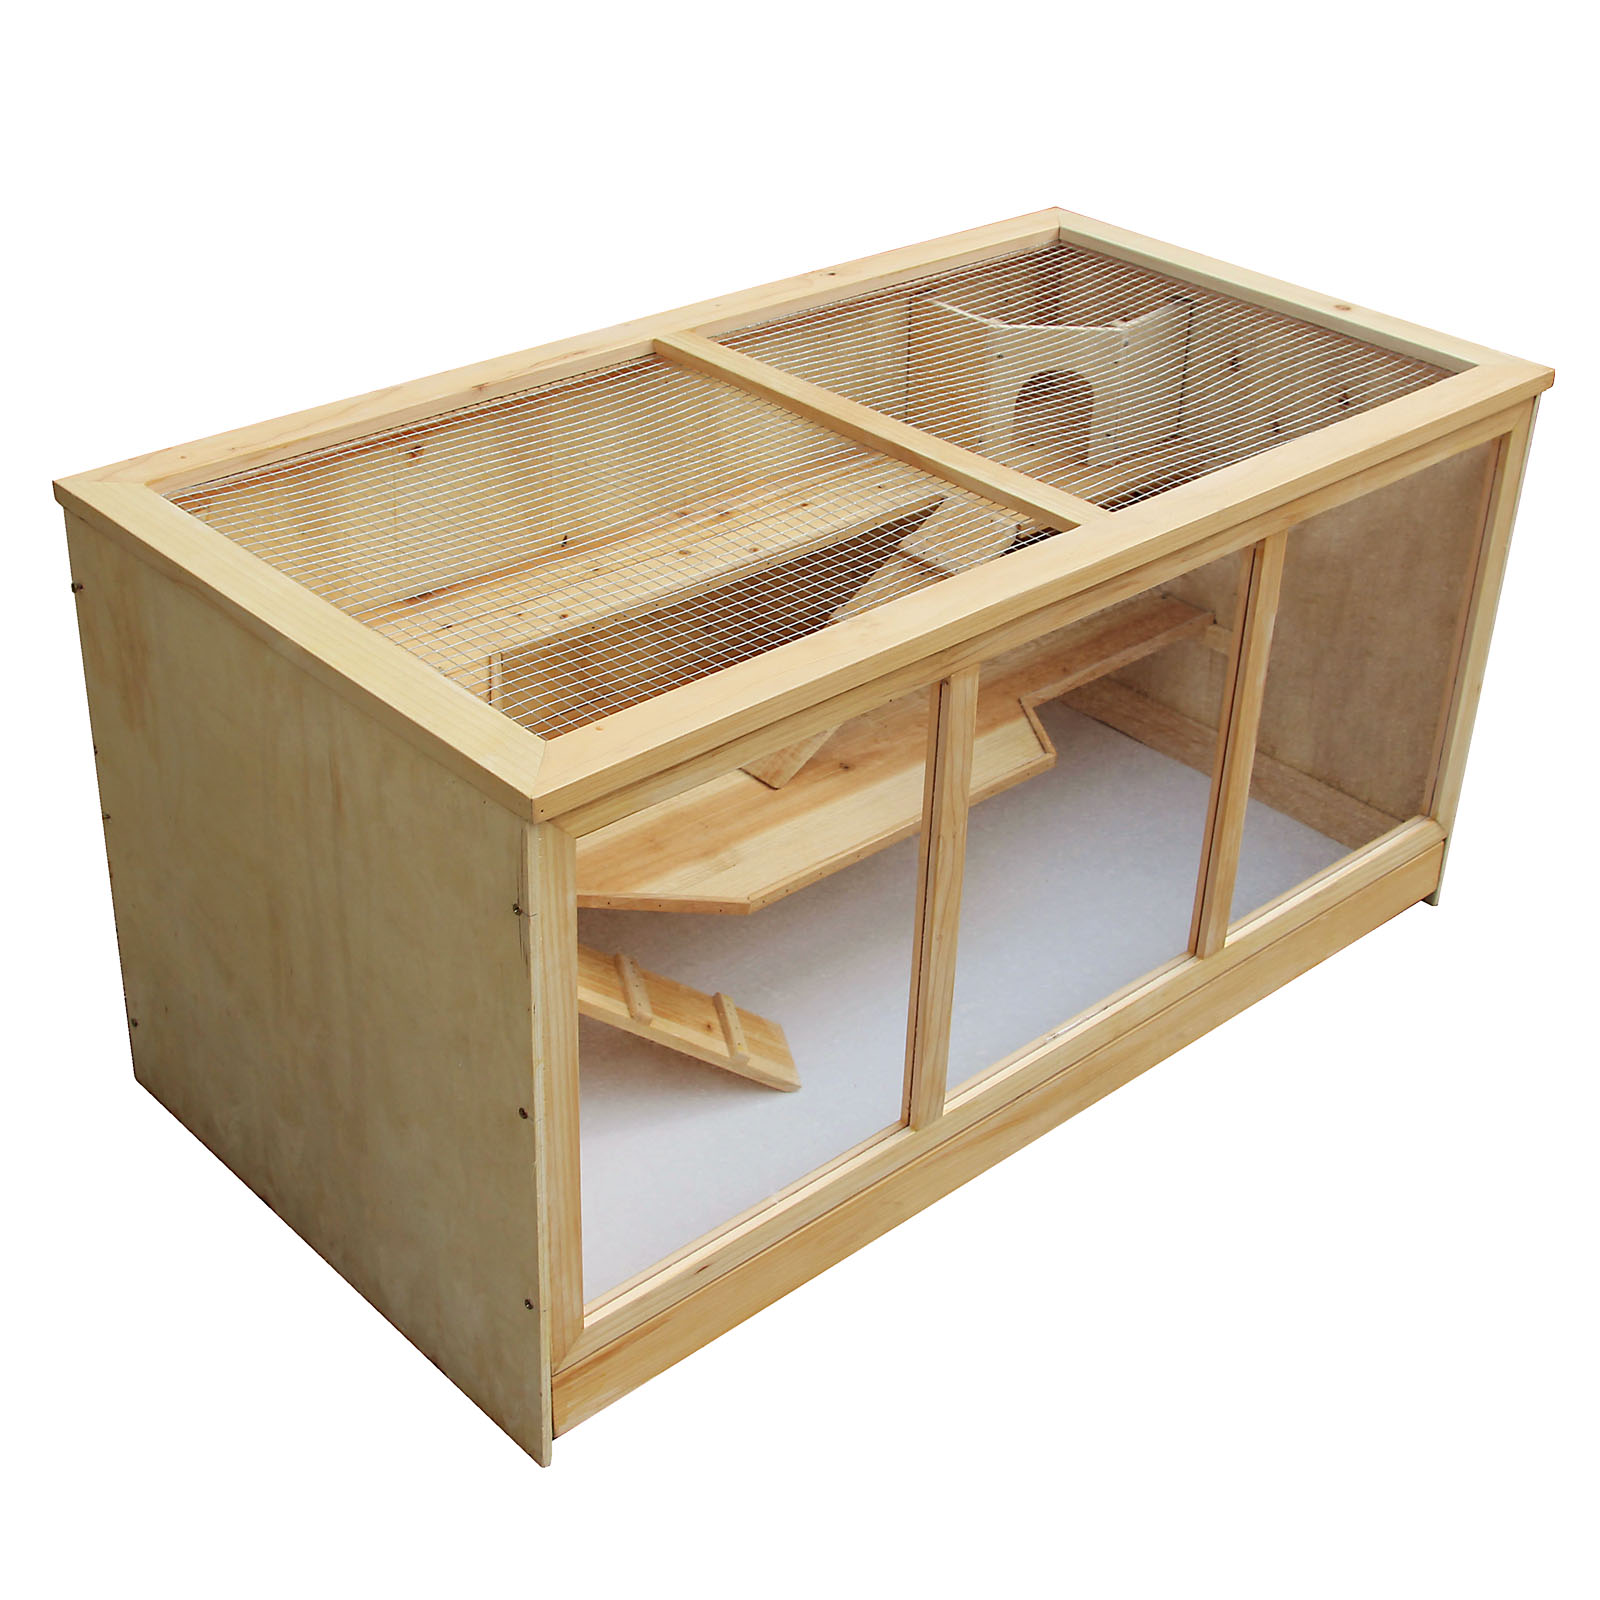 Te meer Titicaca Anoi XXL hamster cage, pet, mouse hutch, enclosure